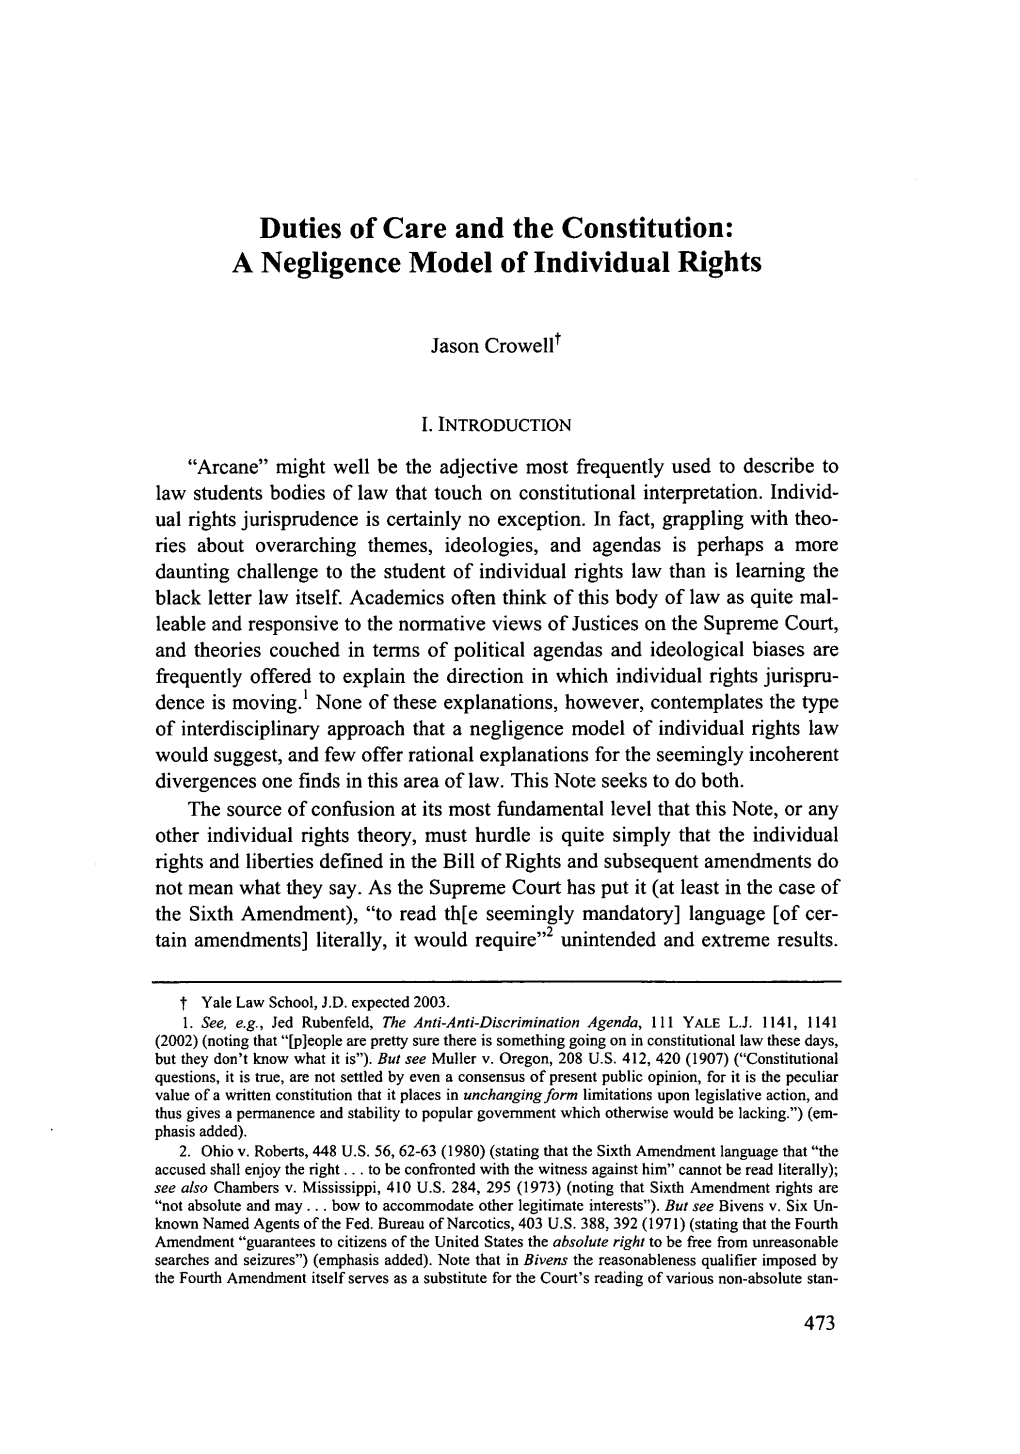 Duties of Care and the Constitution: a Negligence Model of Individual Rights